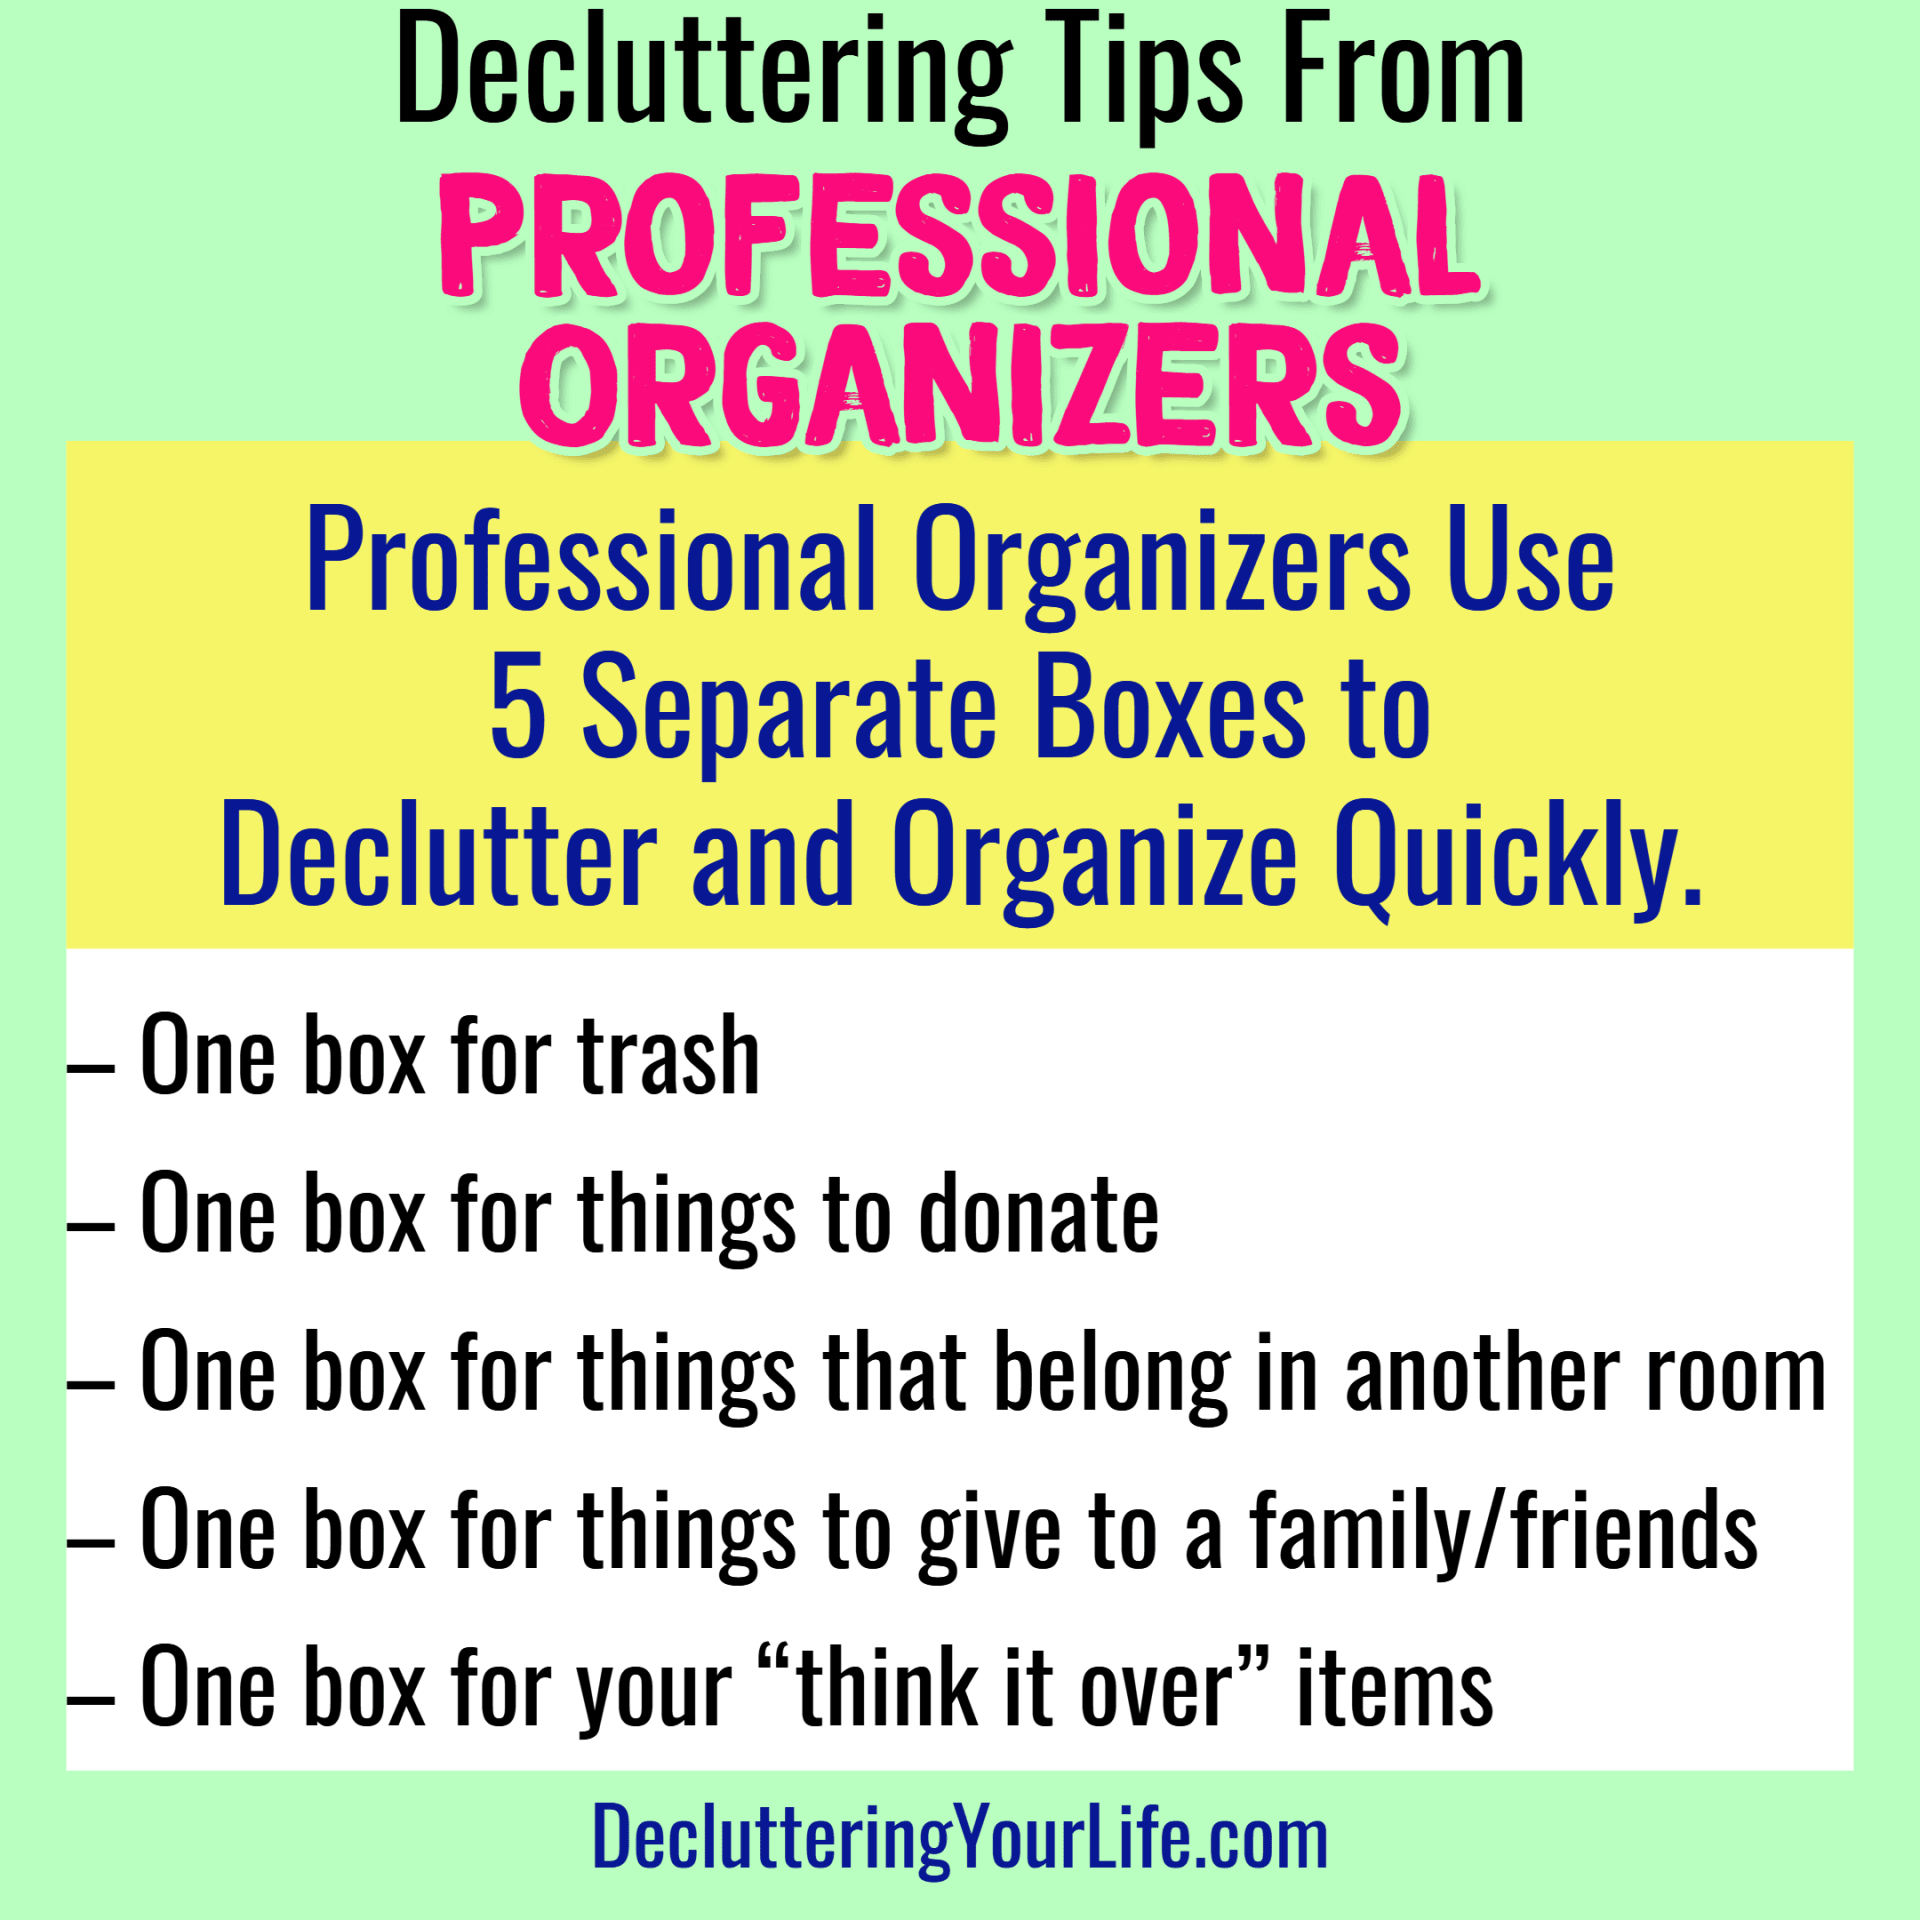 Tips from Professional Organizers - how to delutter and organize your home fast like a Professional Organizer